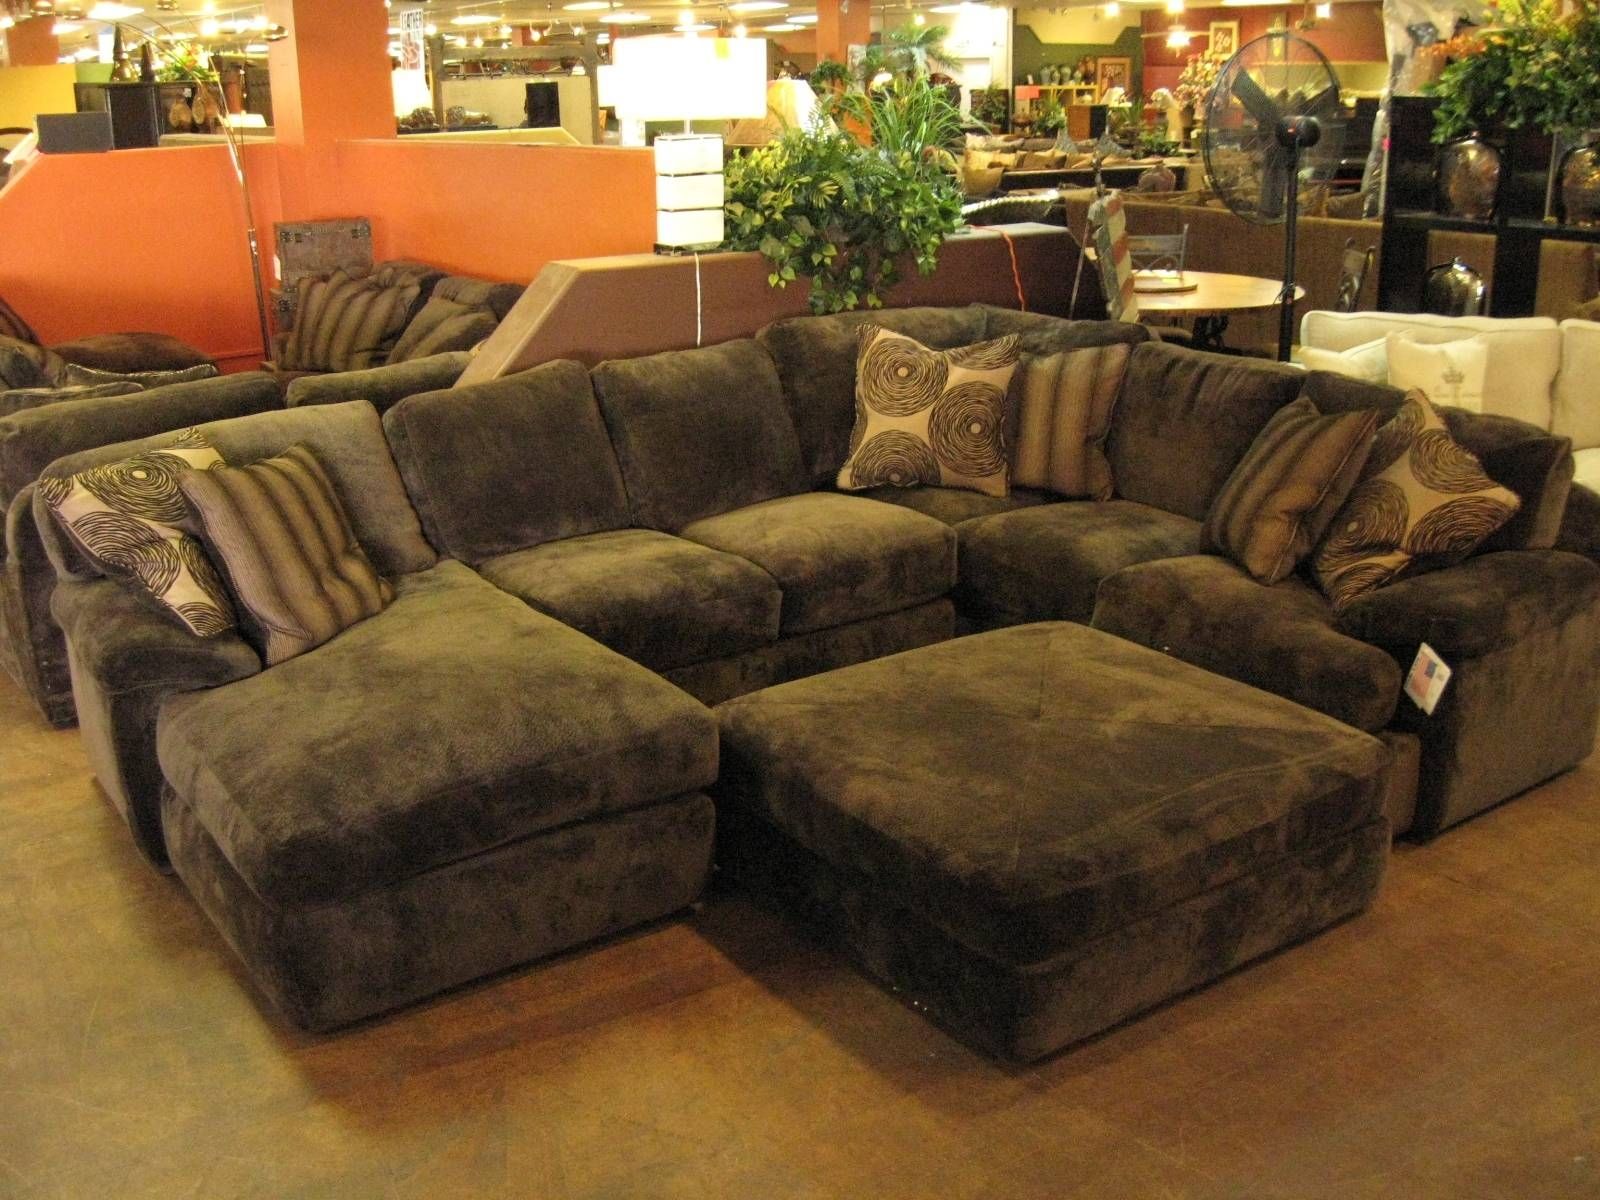 12 Inspirations Of European Style Sectional Sofas Inside European Style Sectional Sofas (View 10 of 30)